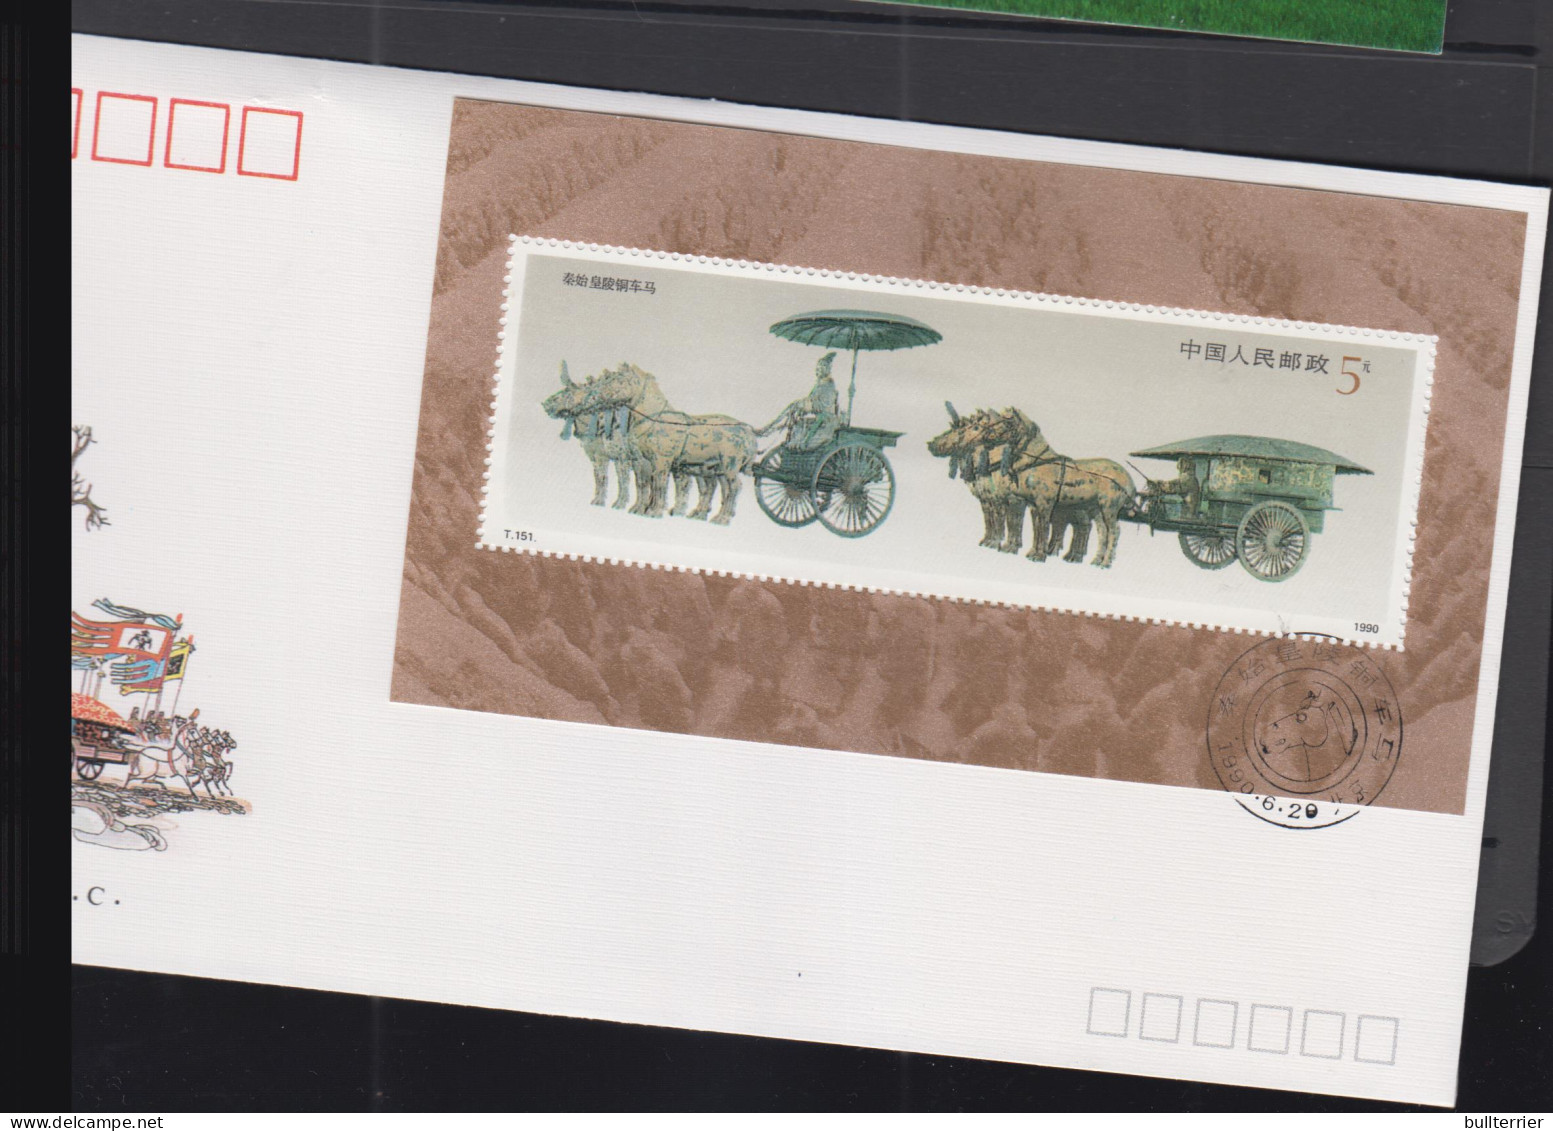 CHINA - 21990 - BRONZE CHARIOT SOUVENIR SHEET ON  ILLUSTRATED FDC  - Storia Postale